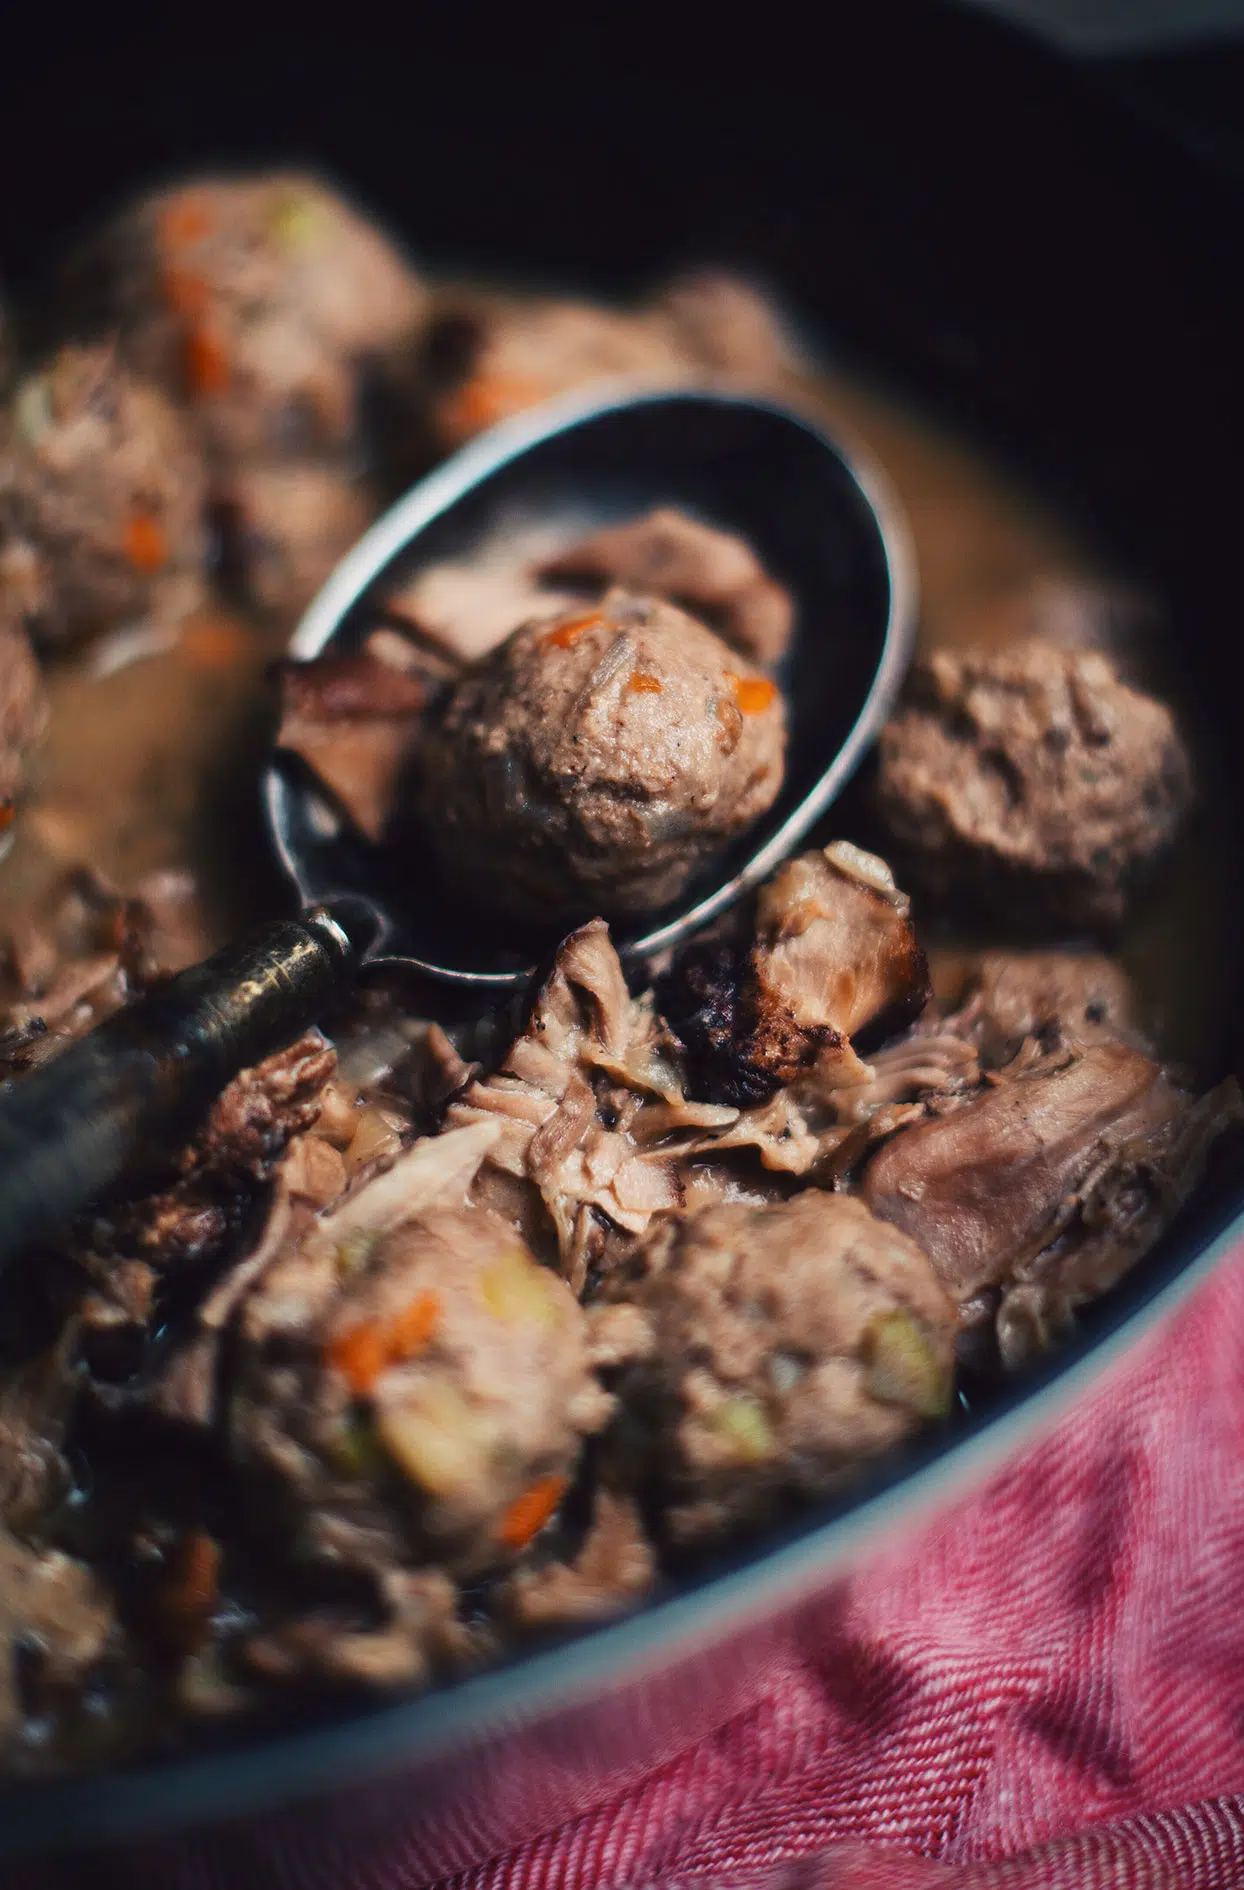 Meatballs and pork legs stew with Maudite beer